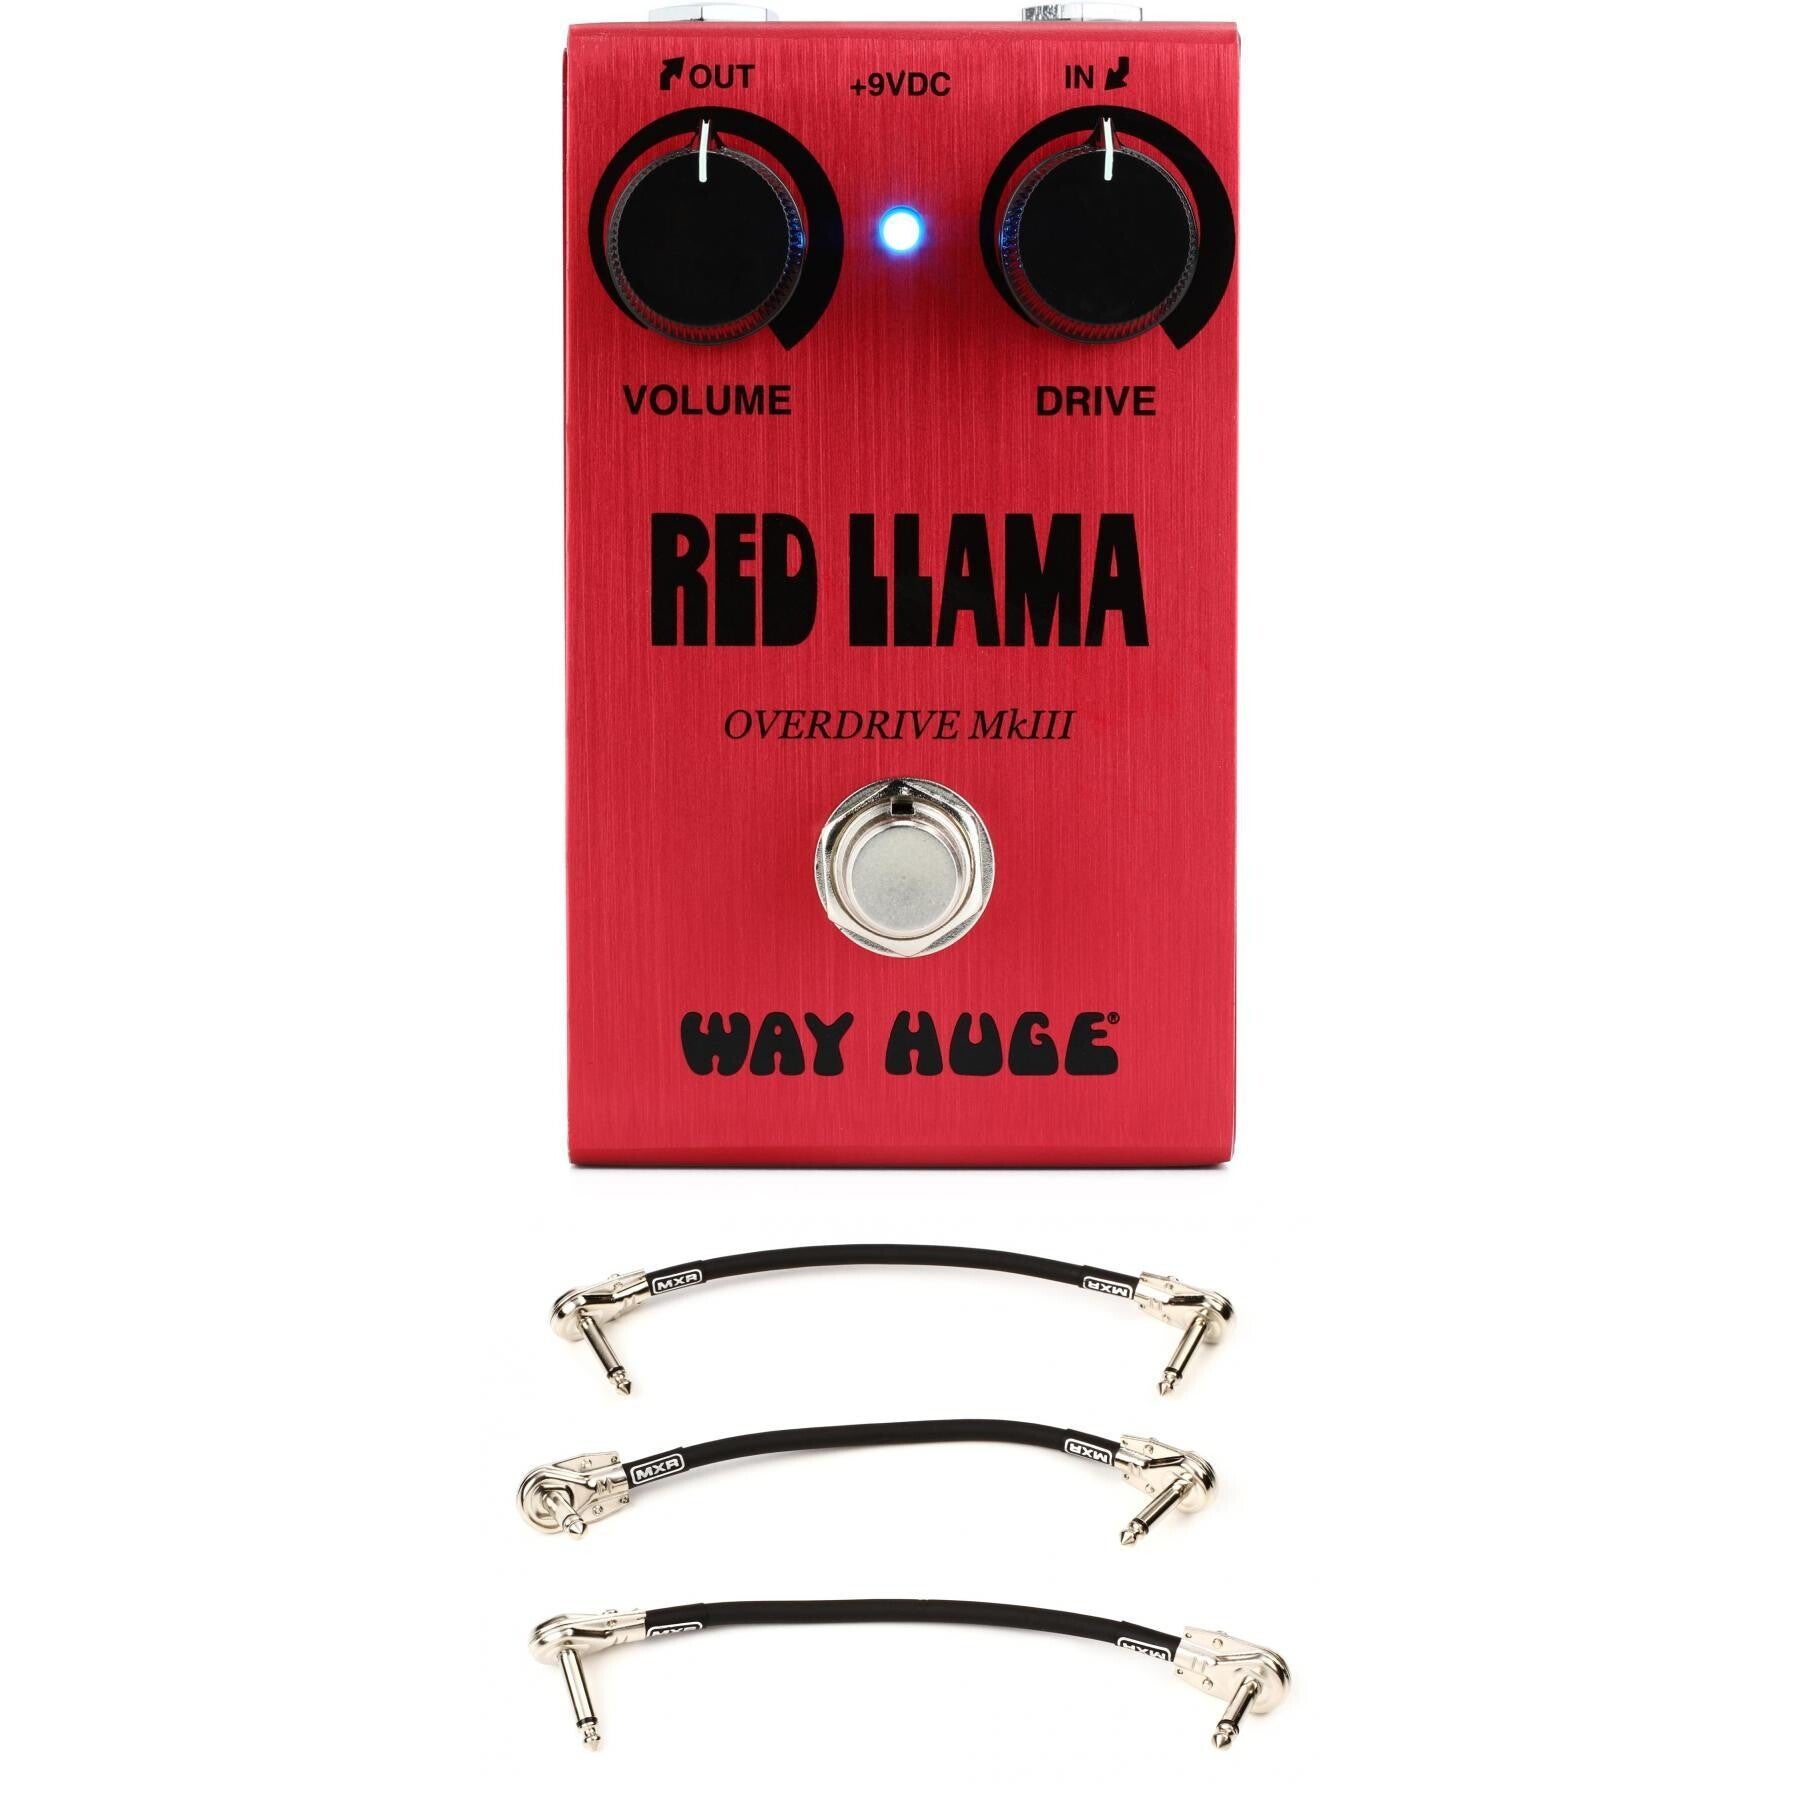 Way Huge Red Llama Overdrive MkIII Smalls Pedal with 3 Patch